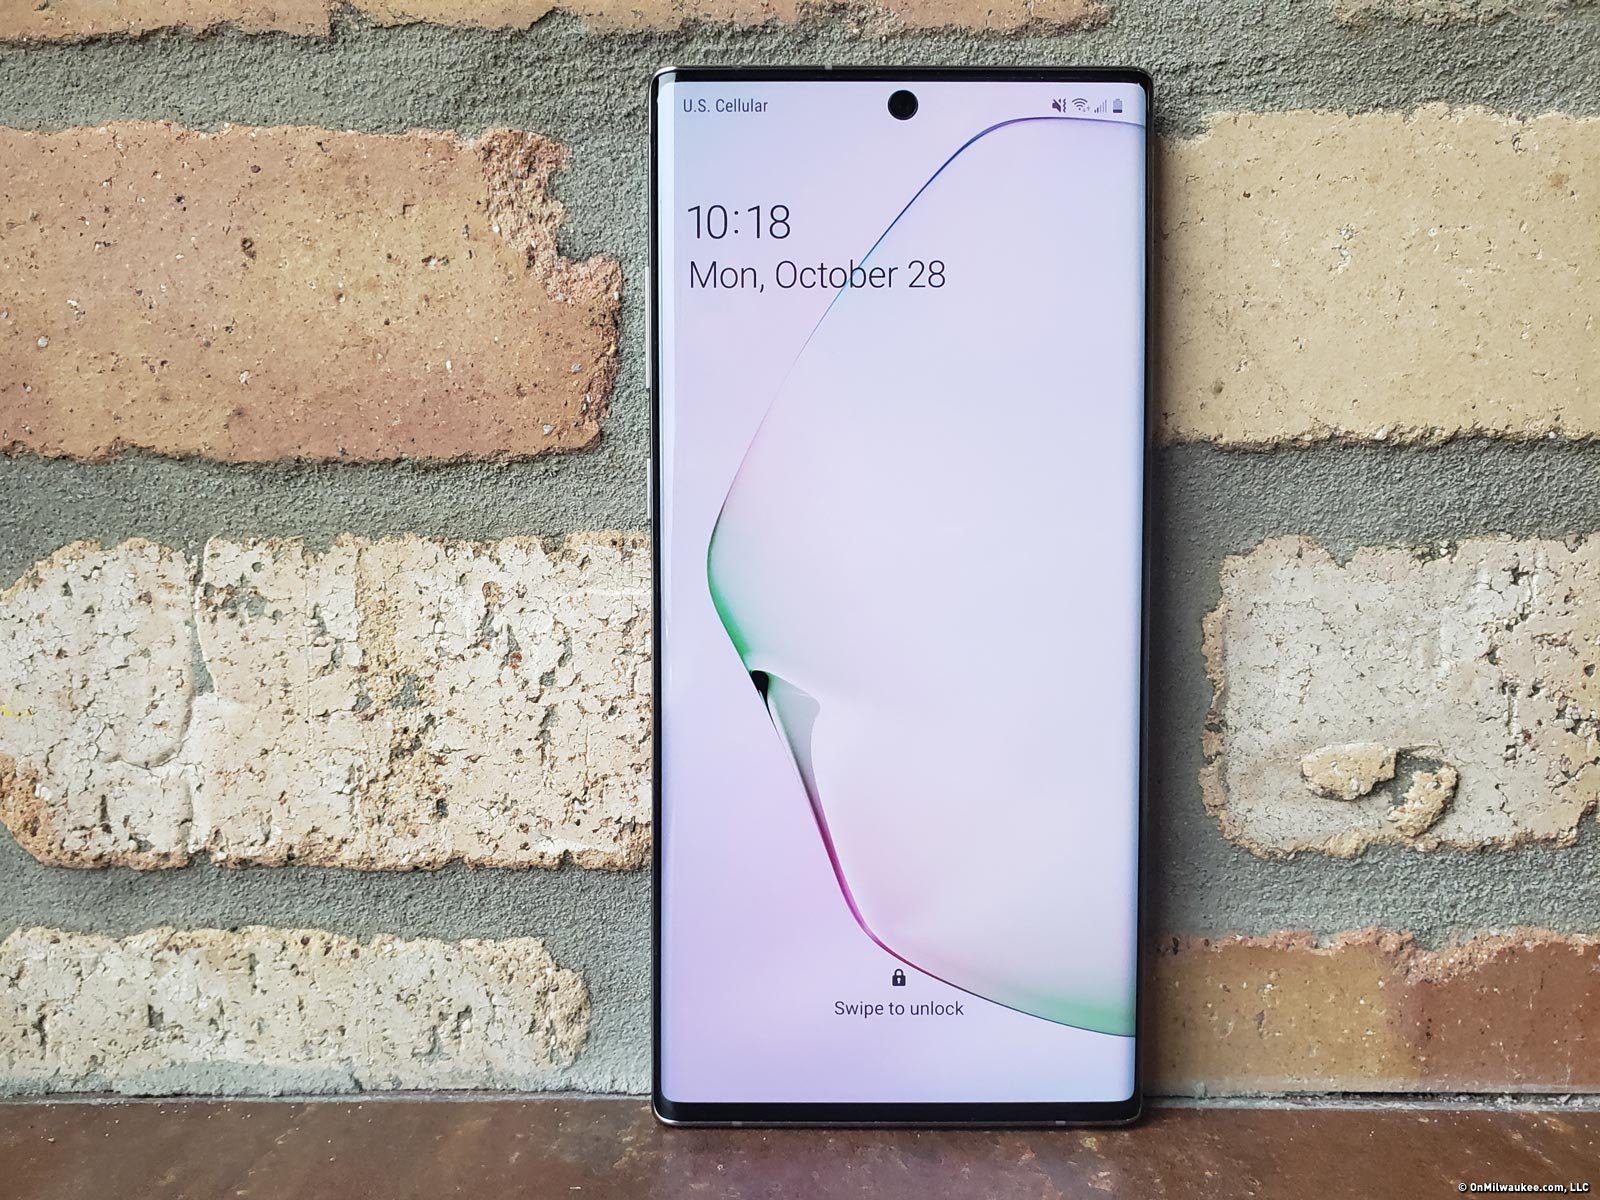 Features that make Samsung Galaxy Note10, Galaxy Note10 Plus great upgrades